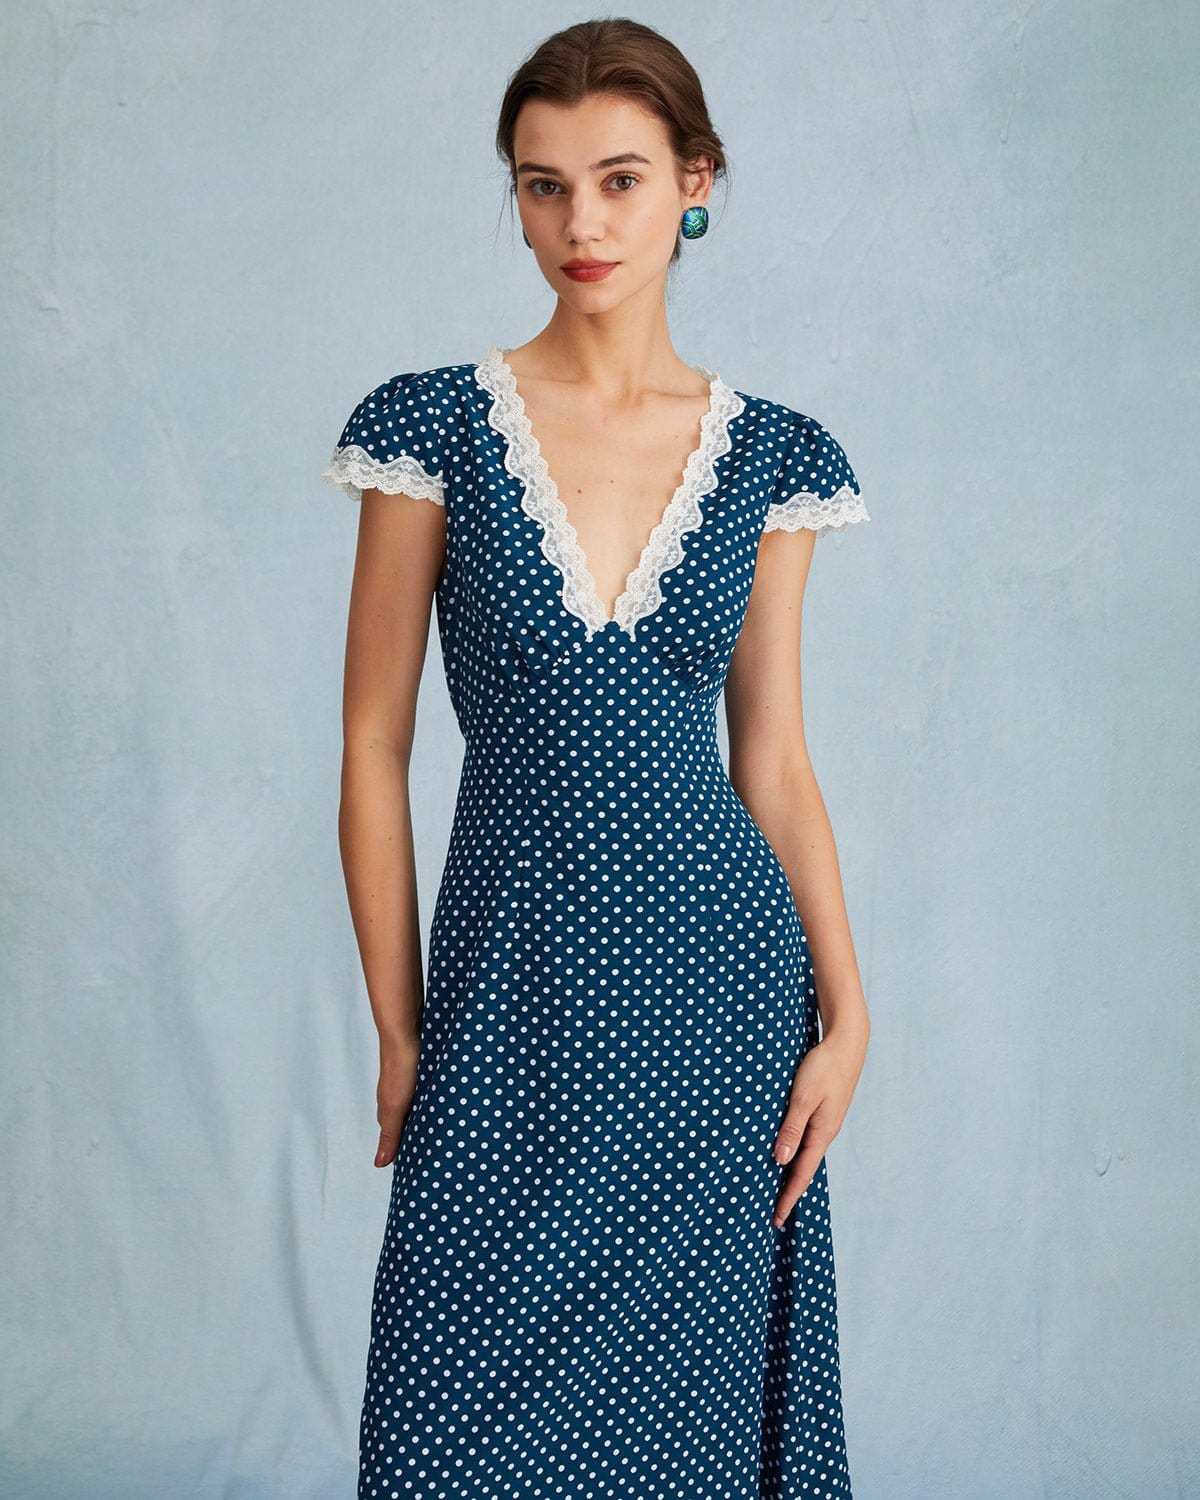 The Navy V Neck Polka Dot Lace Ruched Maxi Dress - Women's Navy Polka Dot  Cap Sleeve Dress - Navy - Dresses